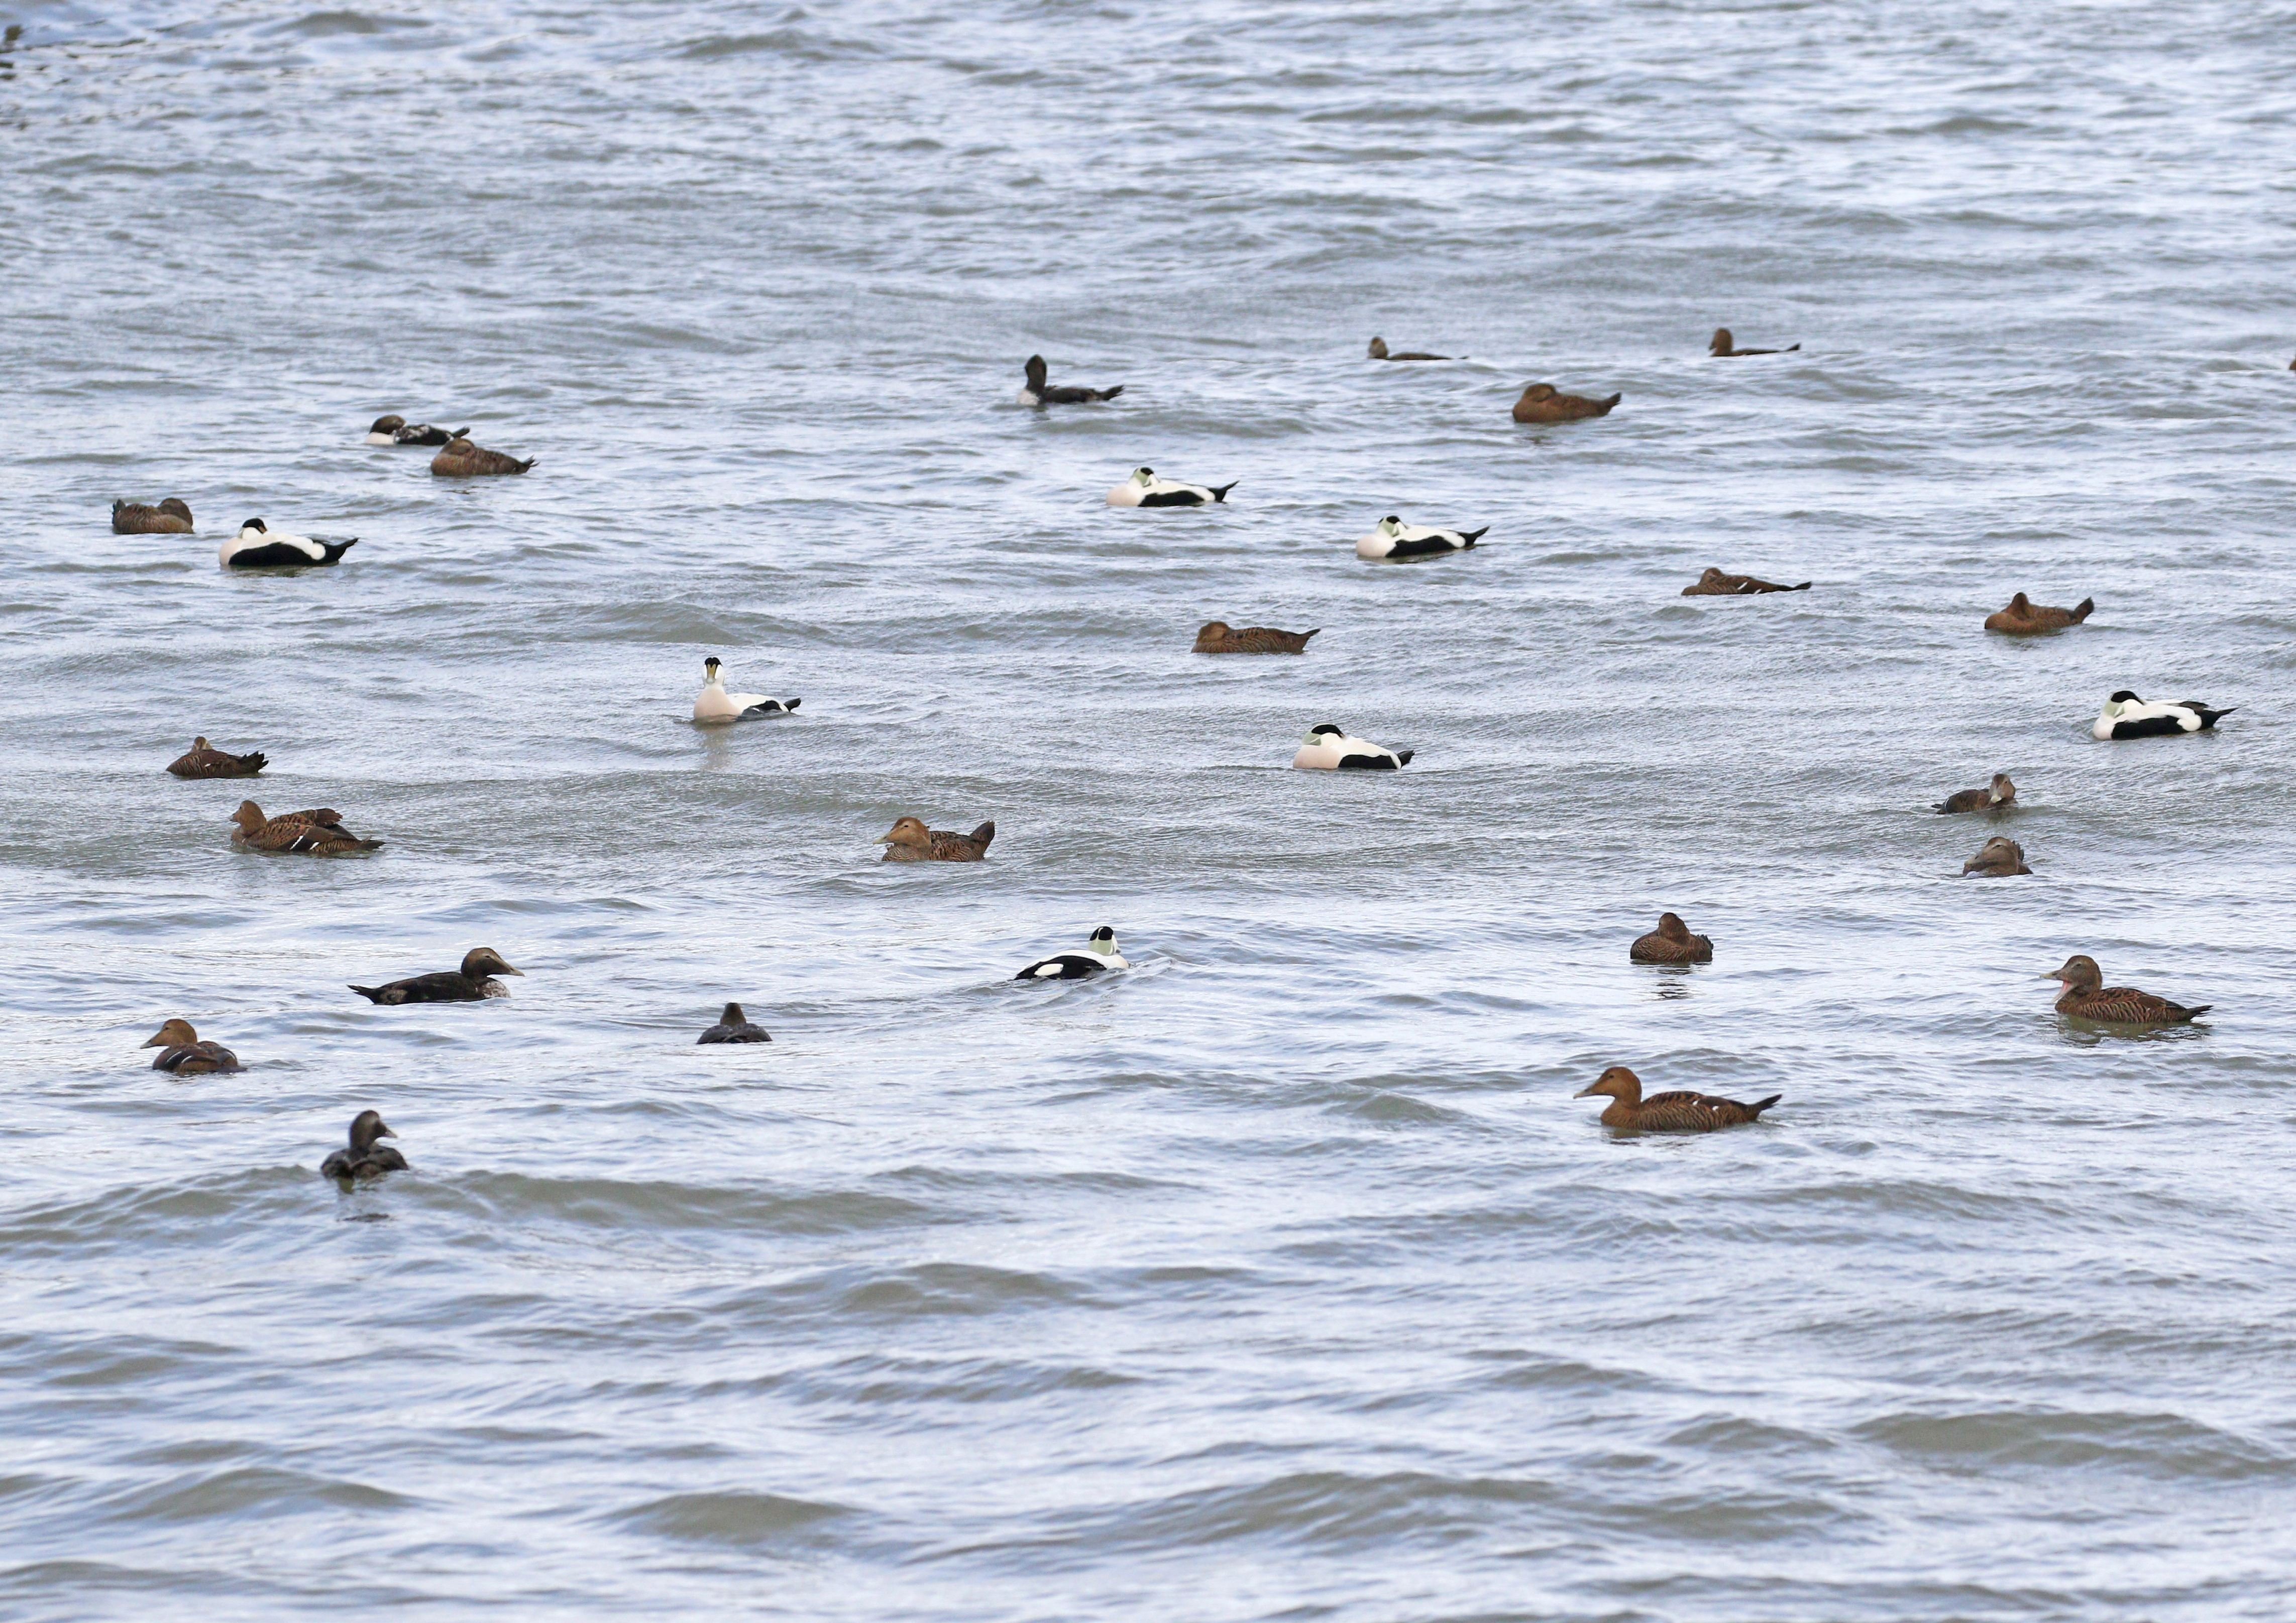 A group of eider ducks at sea.